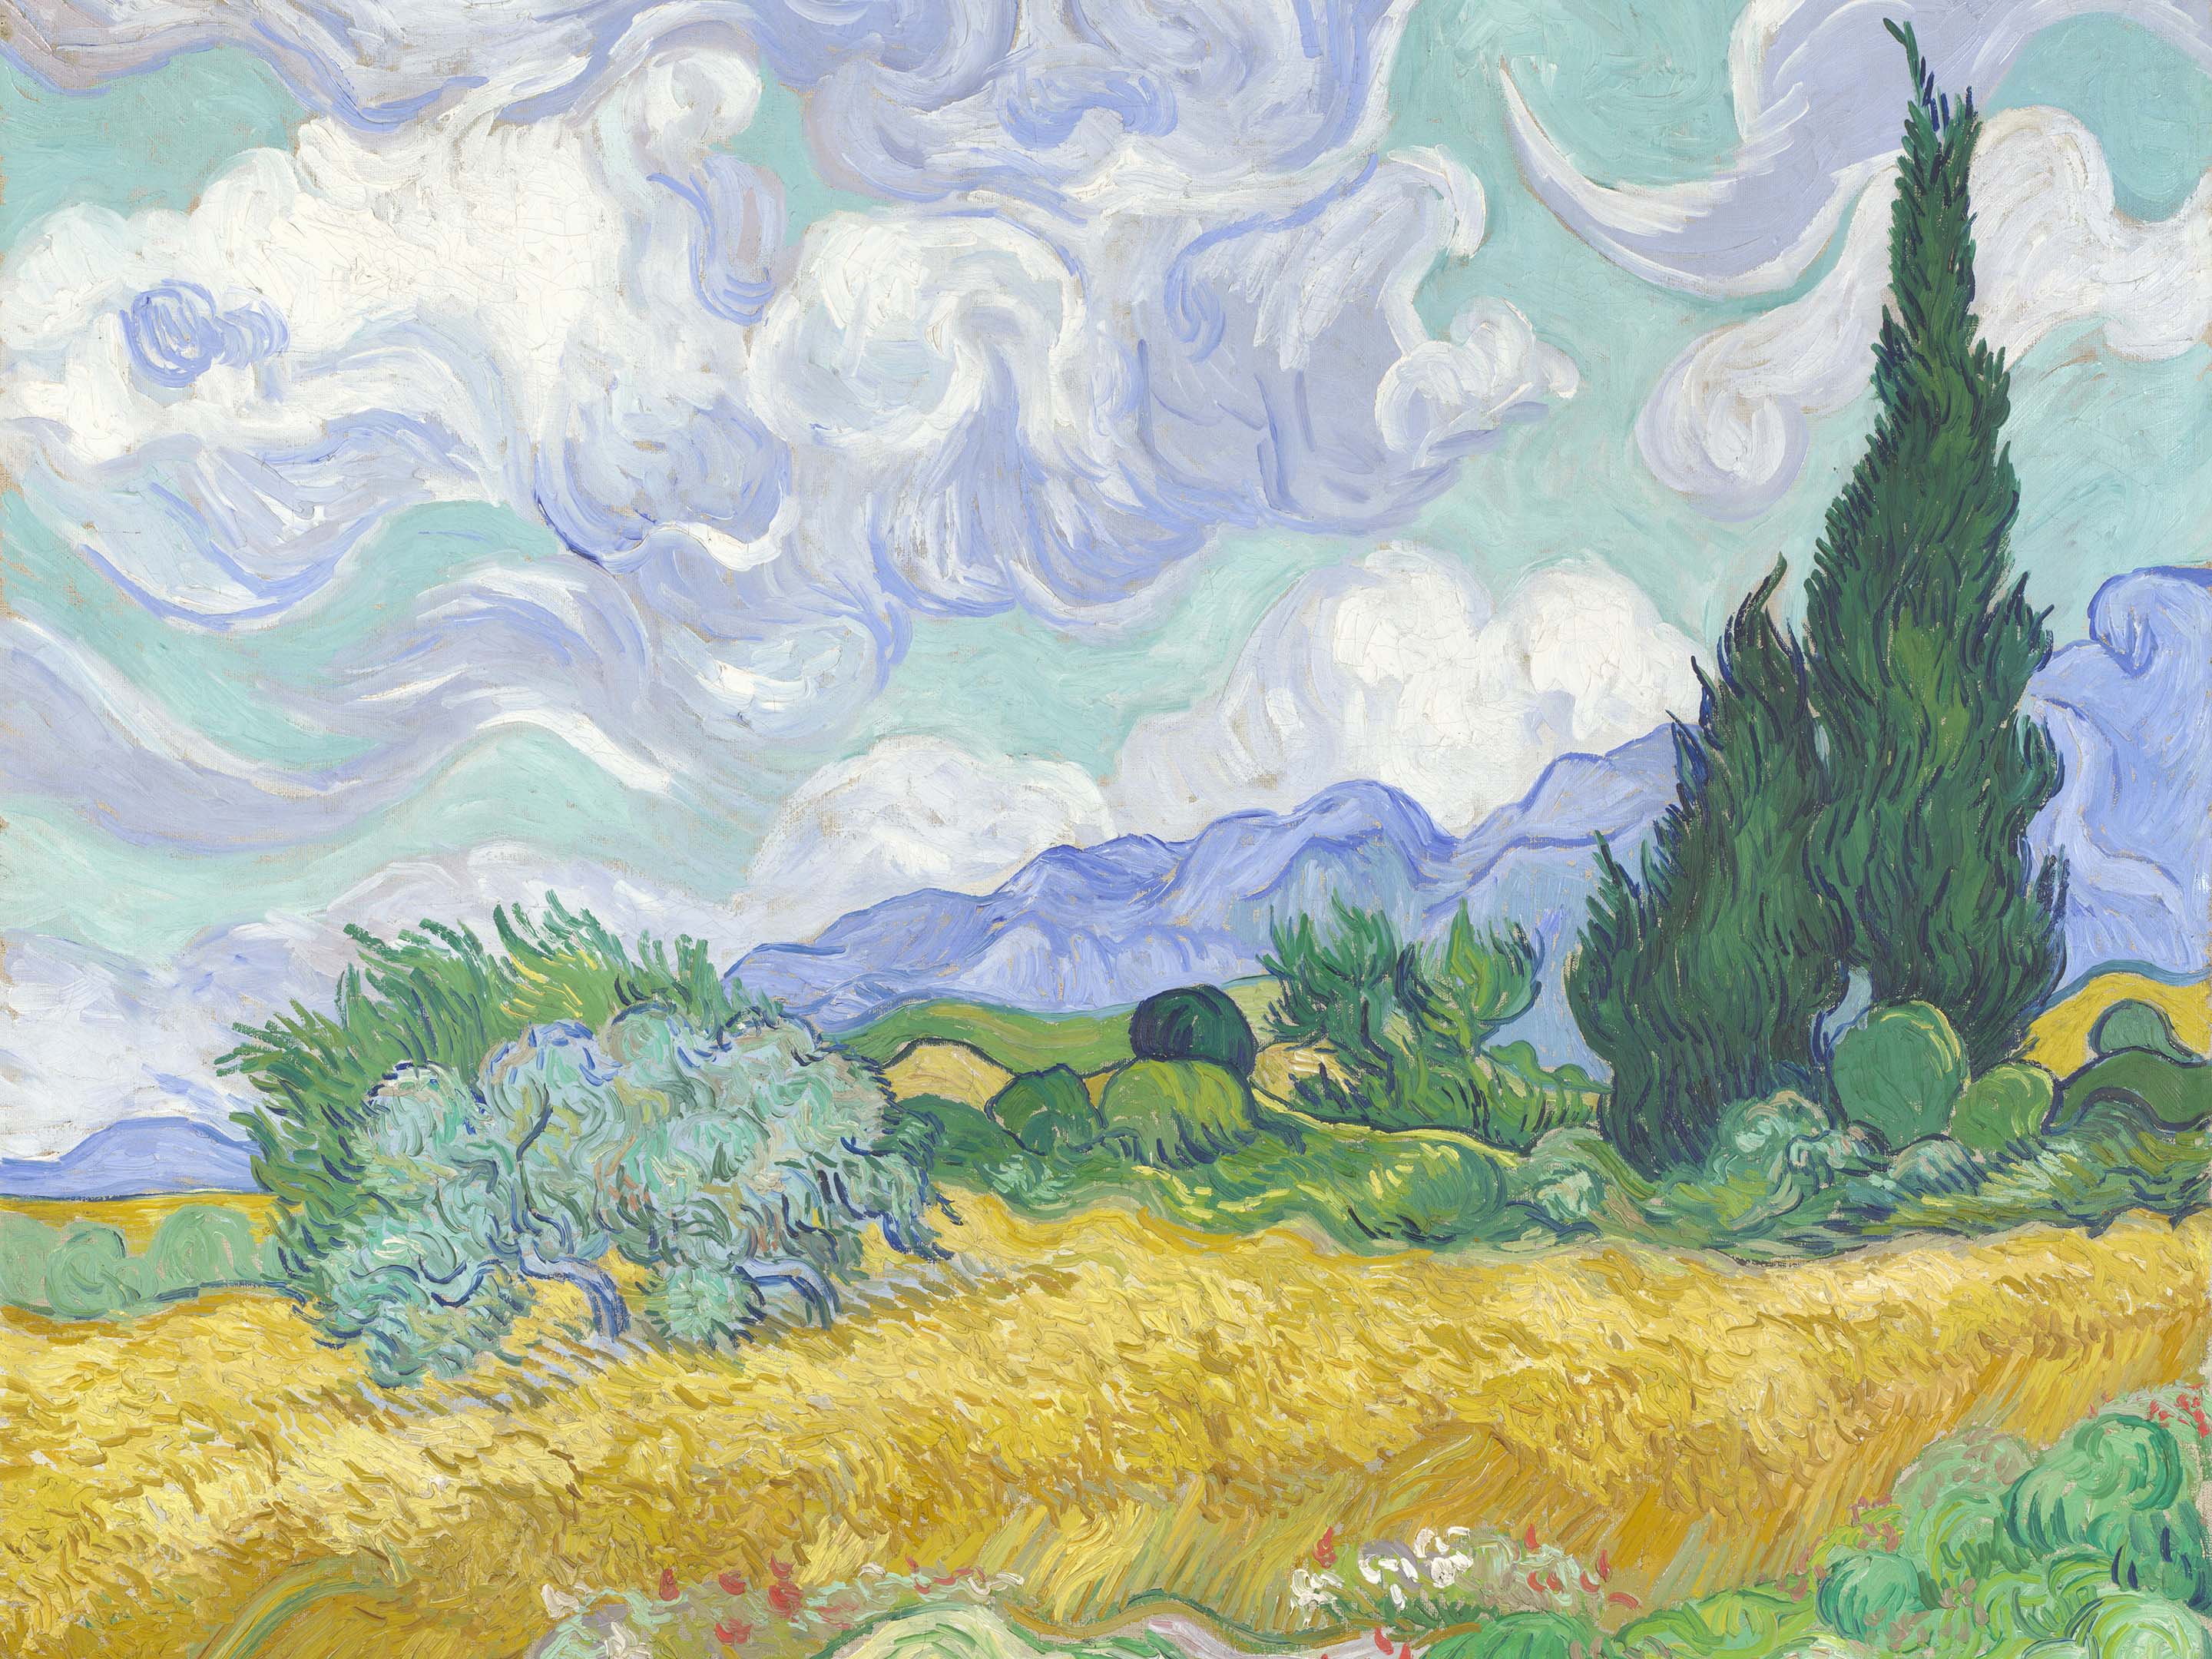 Van Gogh Vincent - Wheat Field with Cypresses